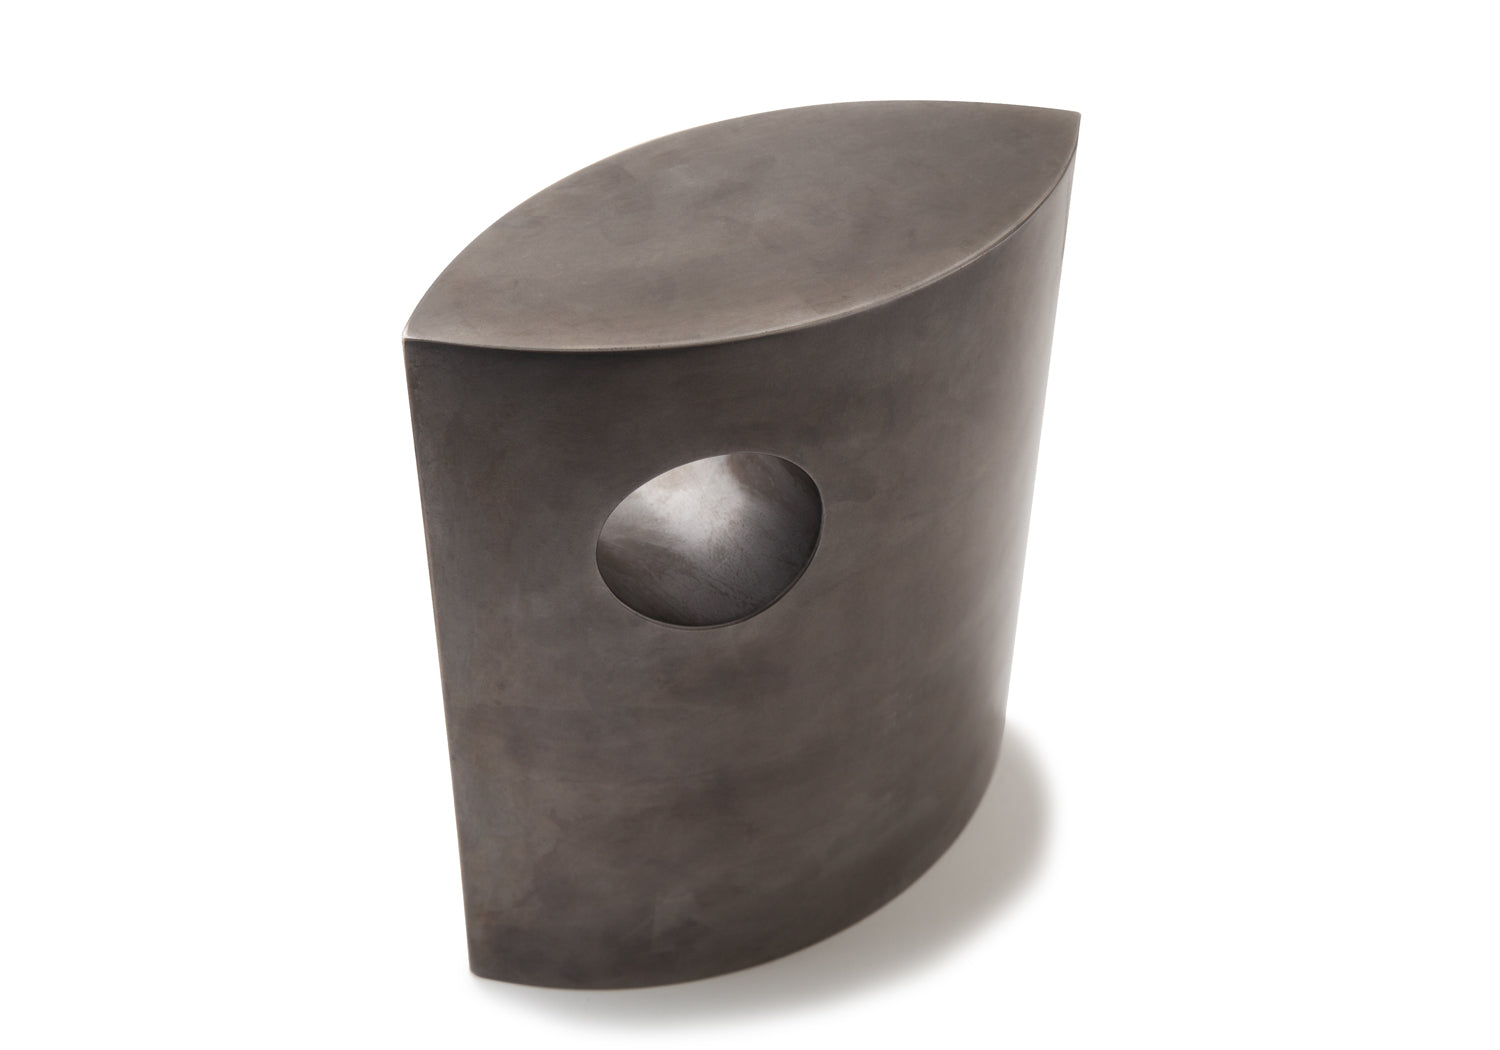 Picture of a beautiful stainless steel cremation urn on sale at Muses Design Urns. Top view.